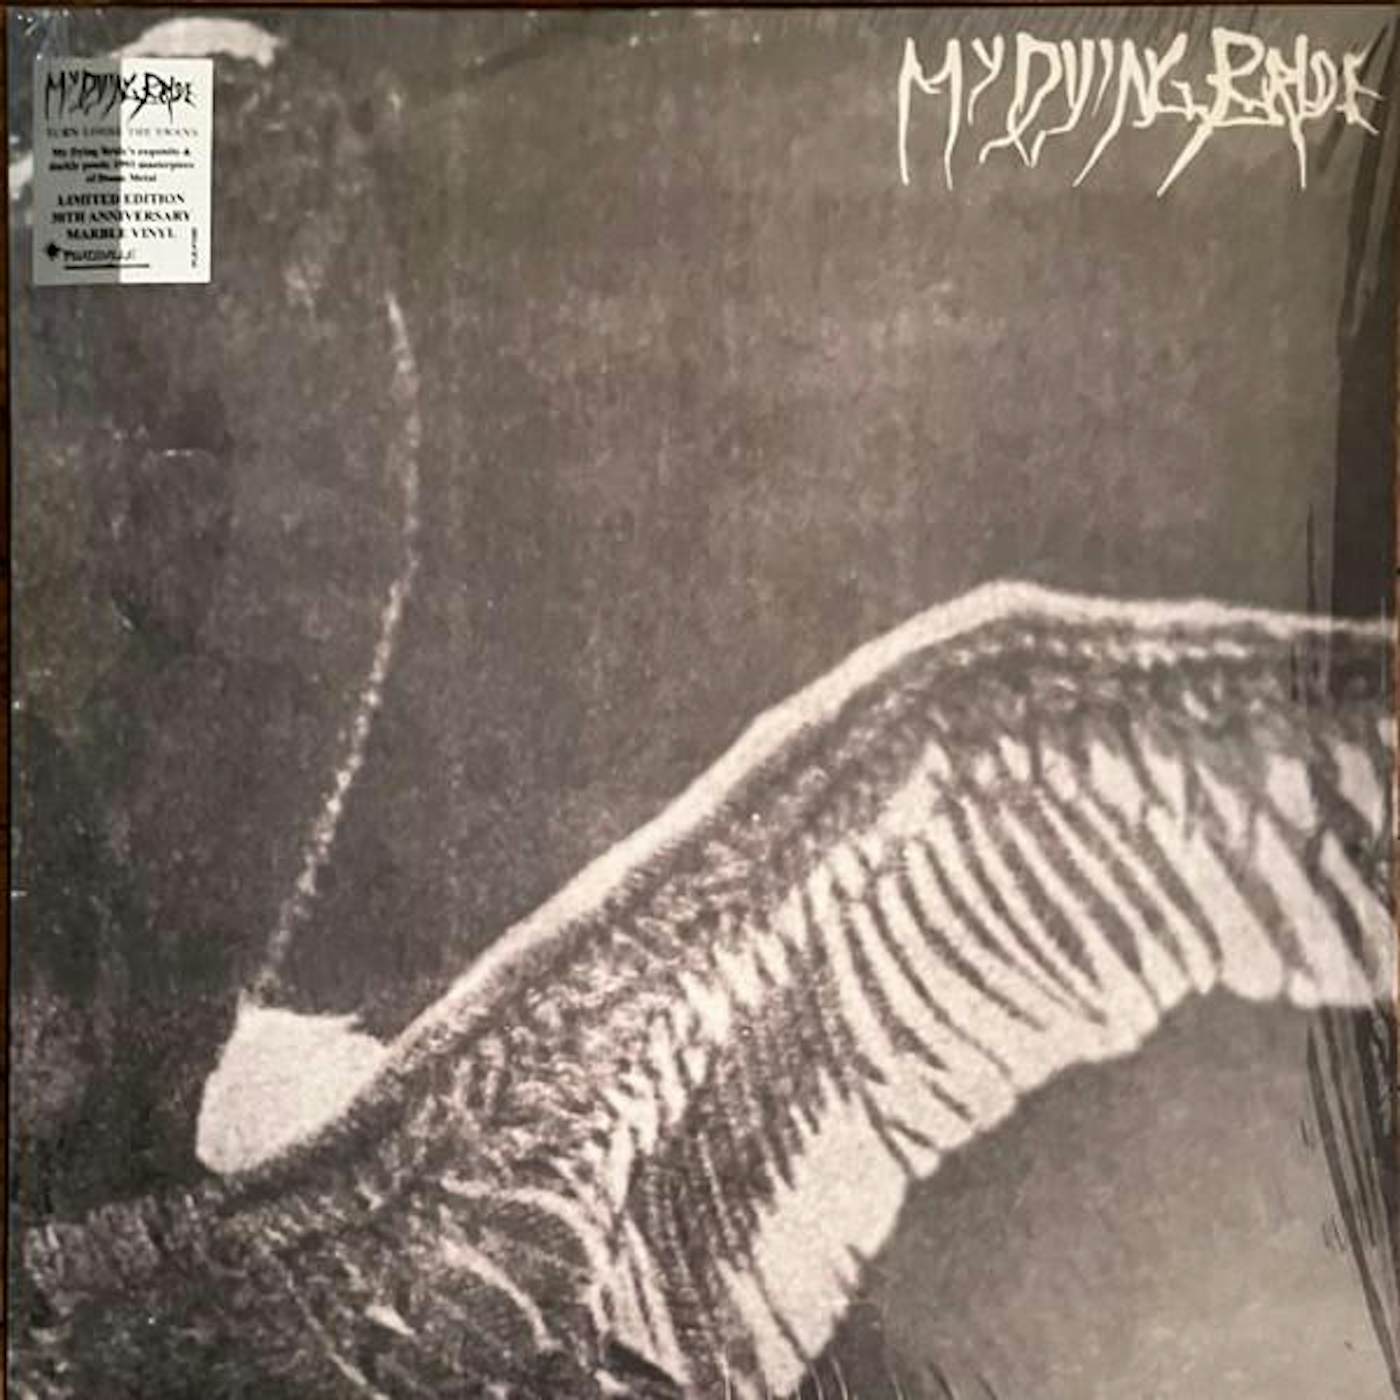 My Dying Bride Turn Loose The Swans (30Th Anniversary/Marble) Vinyl Record